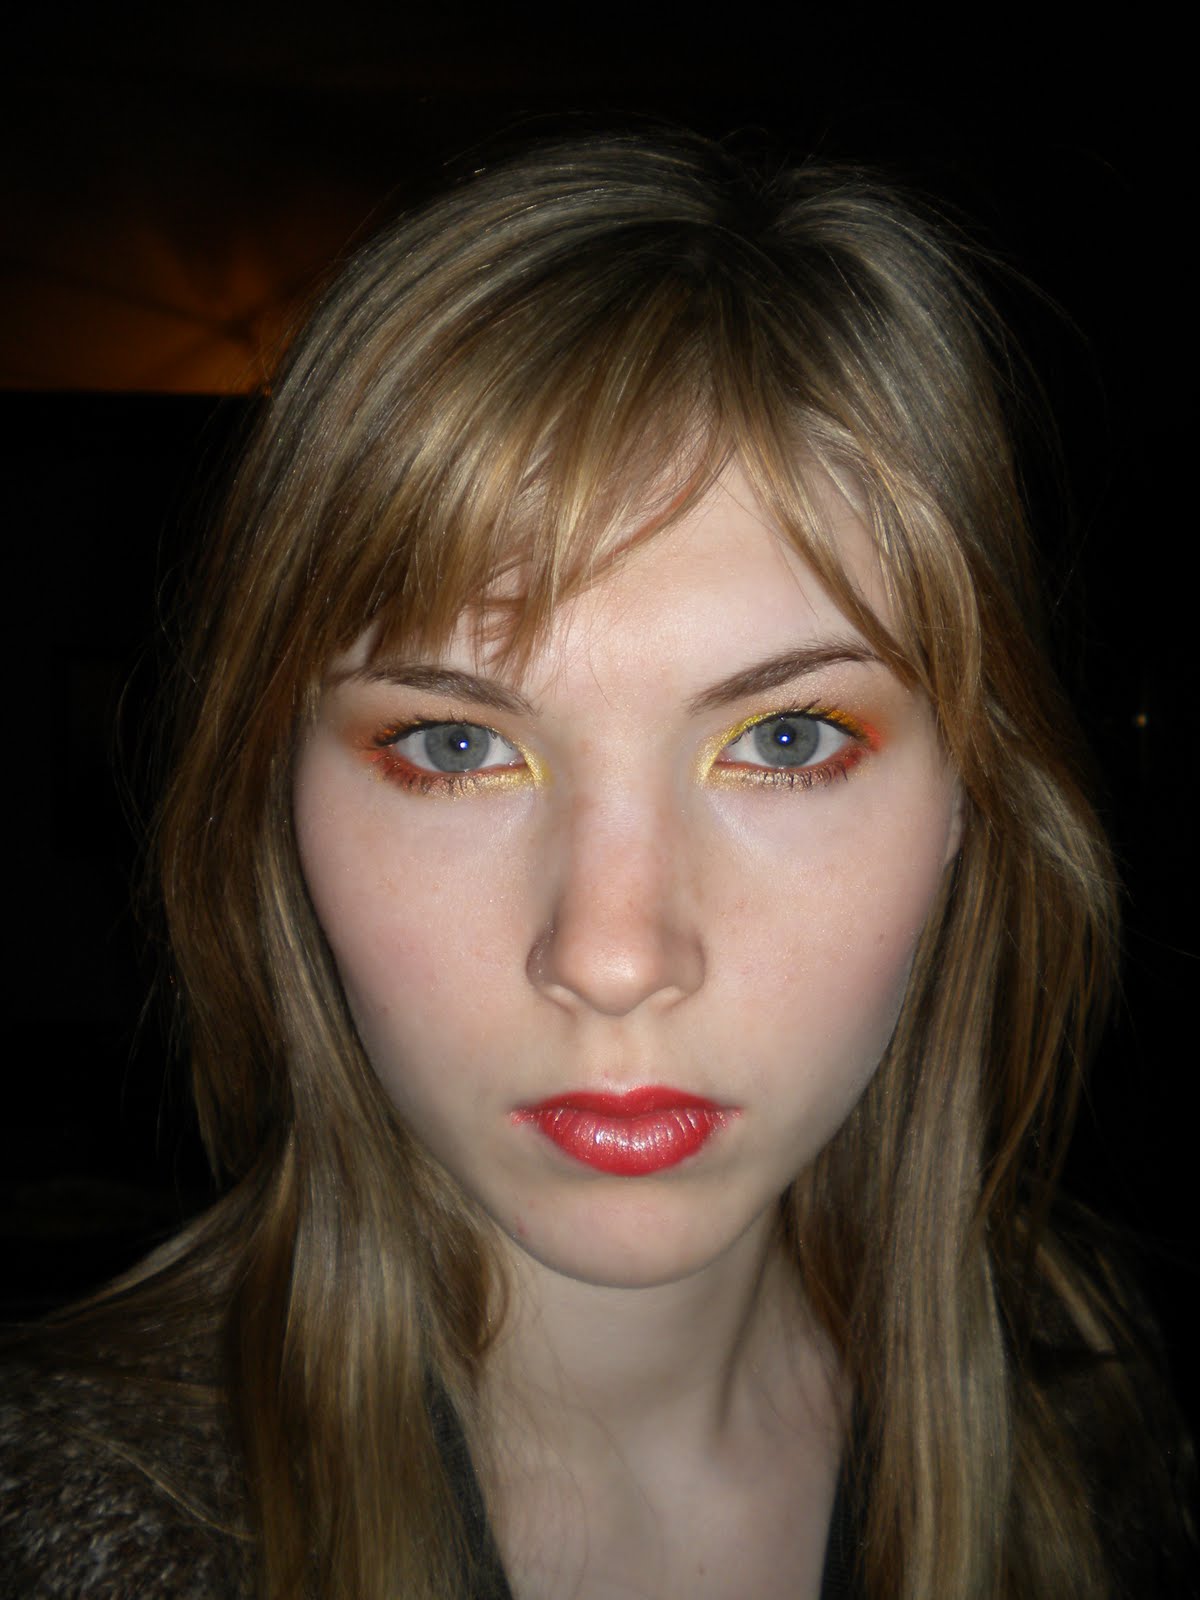 All Day I Dream Of Makeup: April 2011